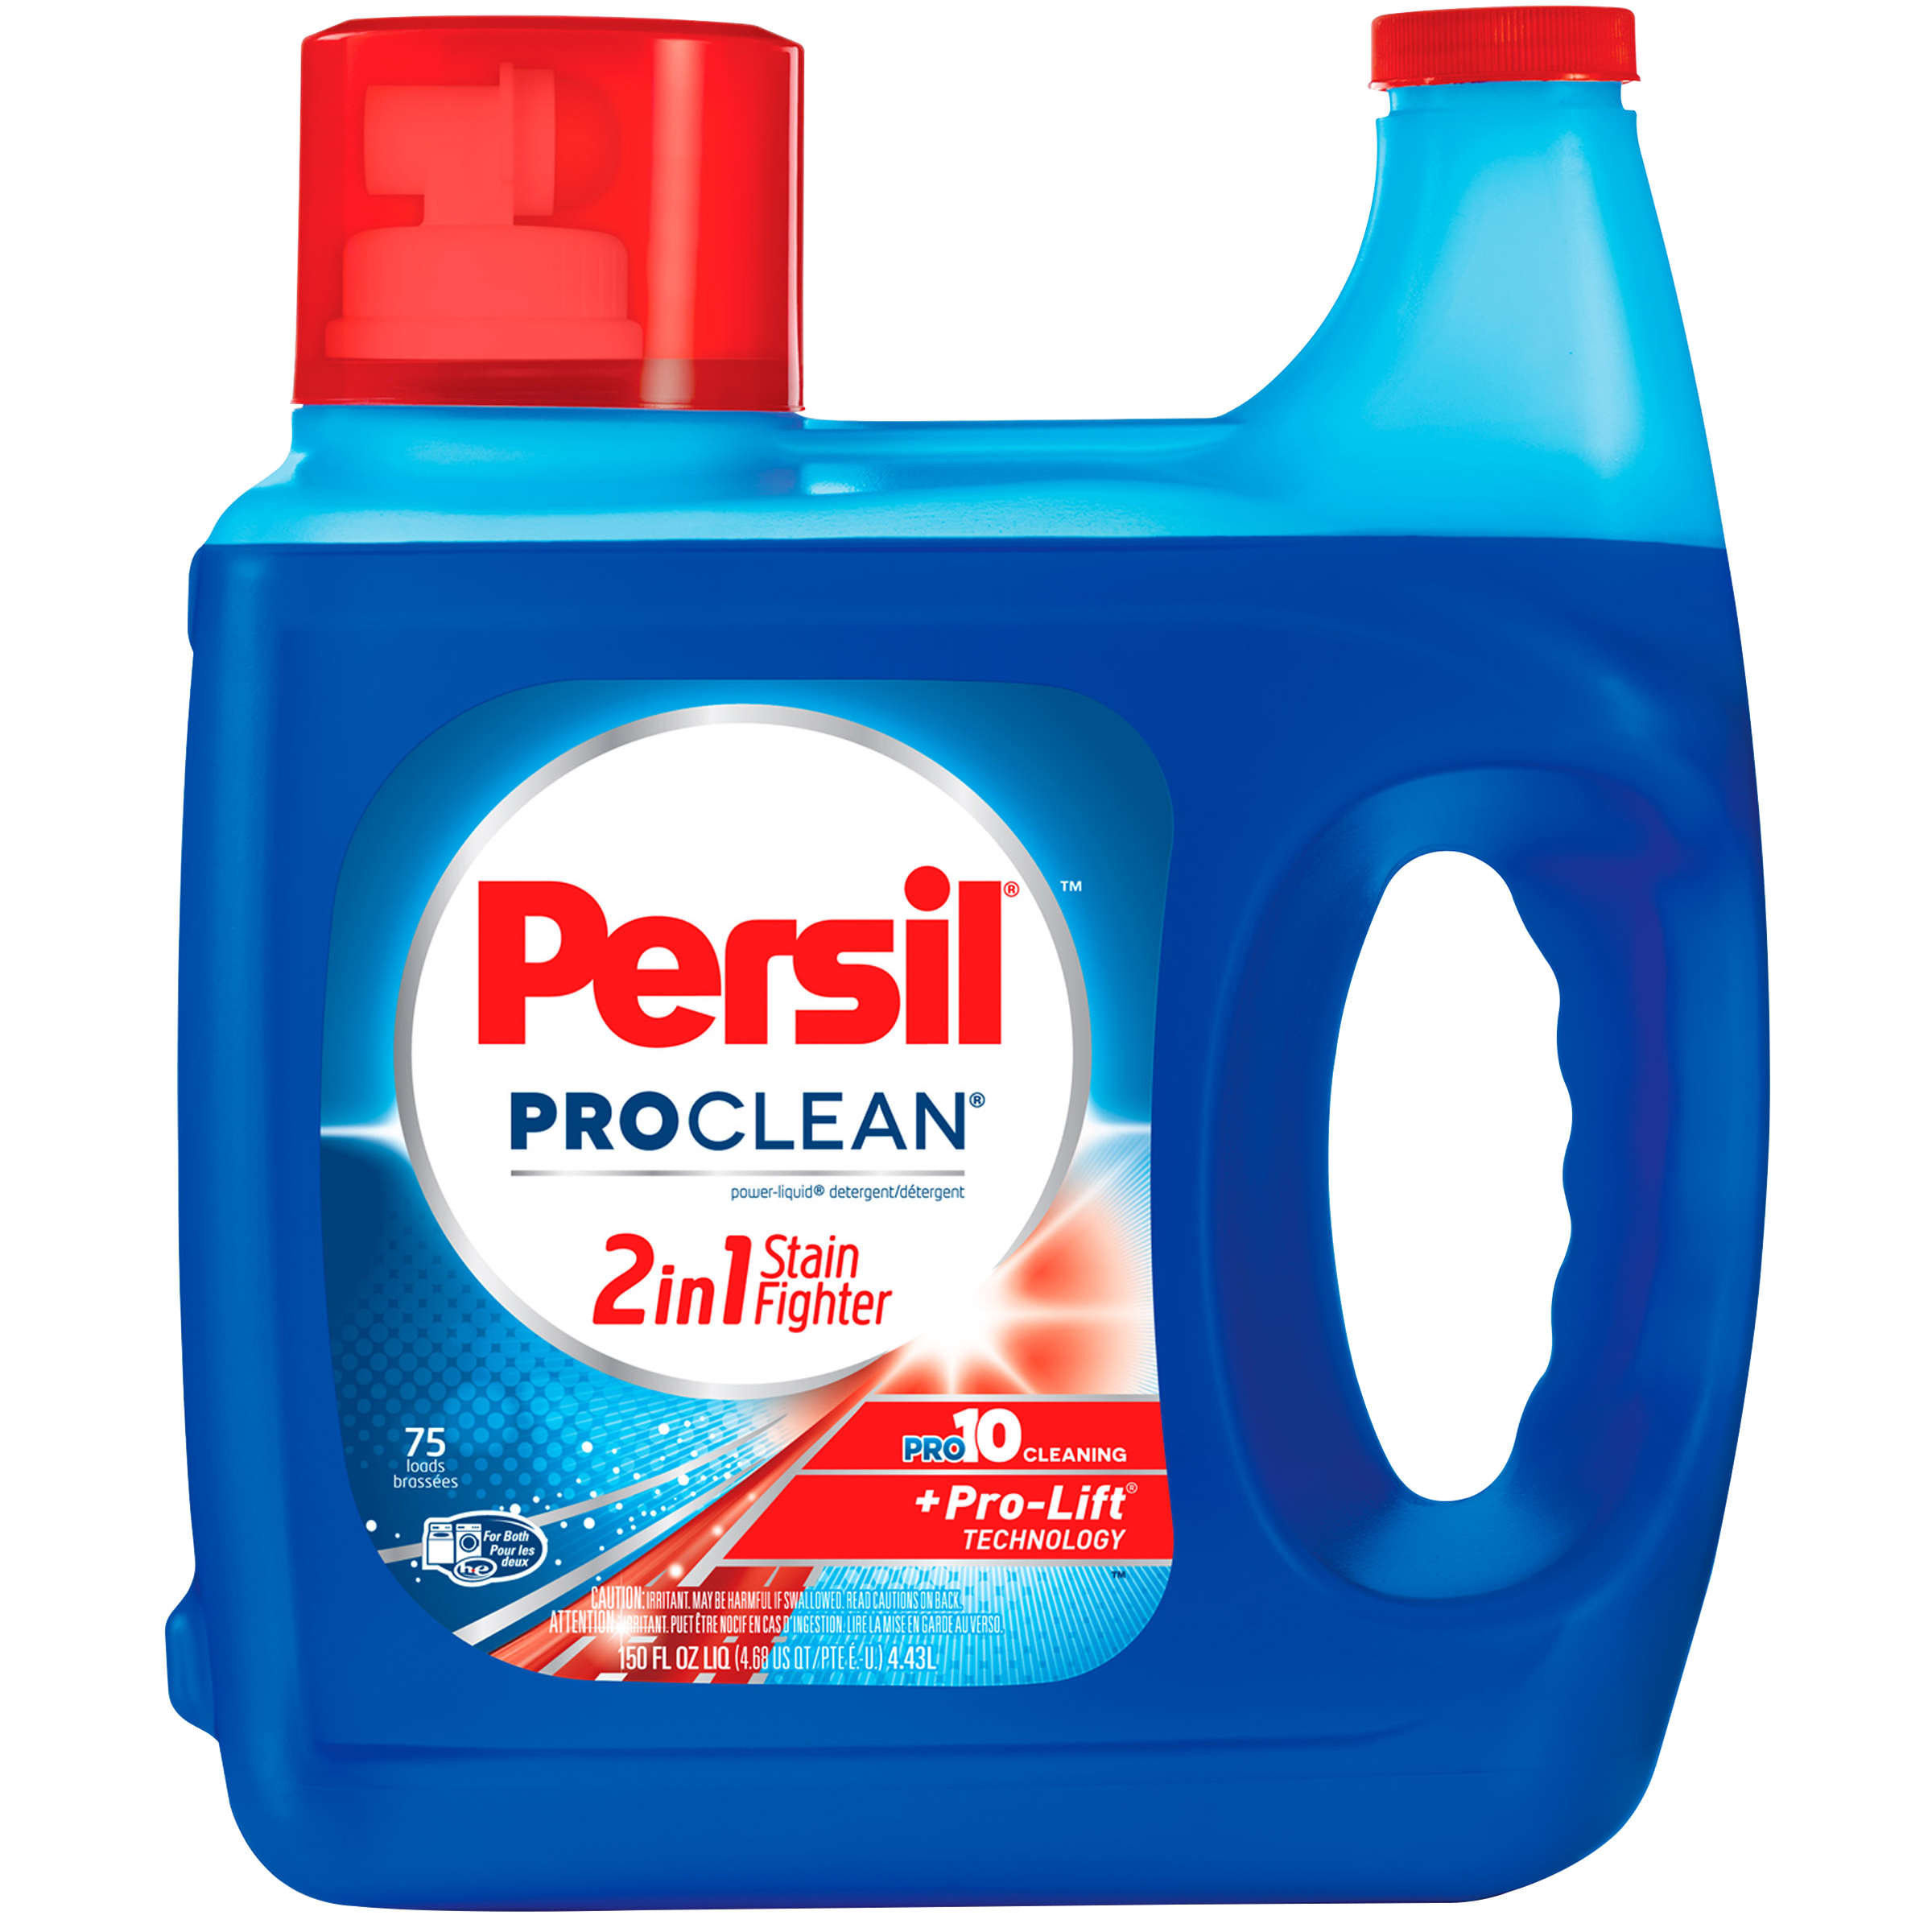 Persil ProClean Laundry Detergent 150 oz Just $13.97 With New High Value Coupon!